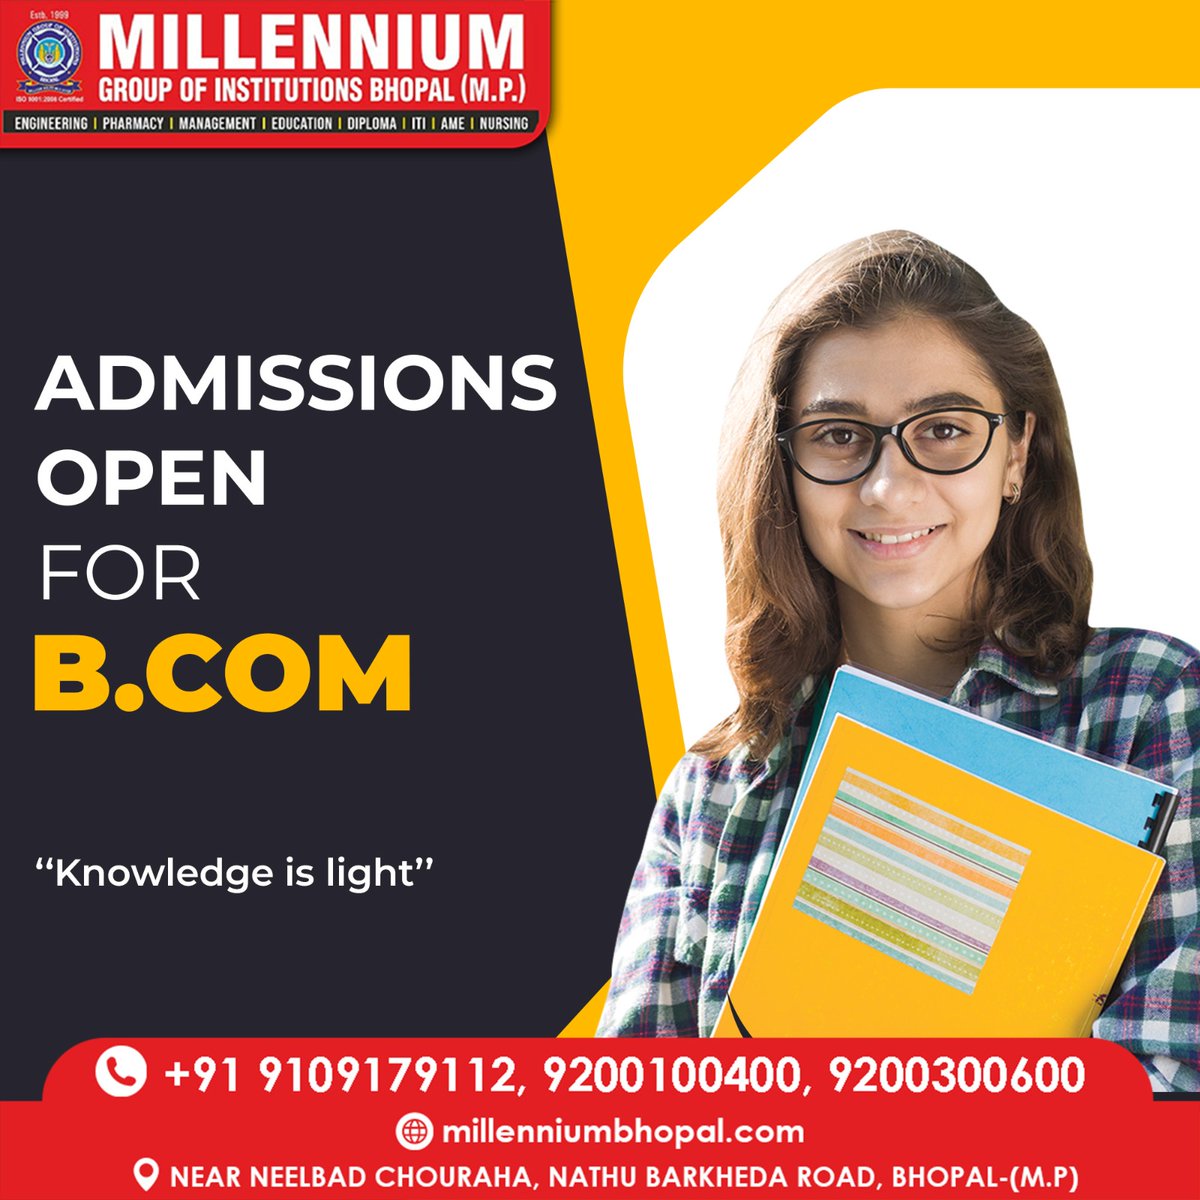 Invest in your passion for commerce and finance at Millennium Group of Institutions: Apply Now for B.Com!
..
.
.
.
#millenium #bcom #commerce #mba #bba #mcom #ca #commercestudents #commercememes #charteredaccountant #icai #education #cma #csstudents #students